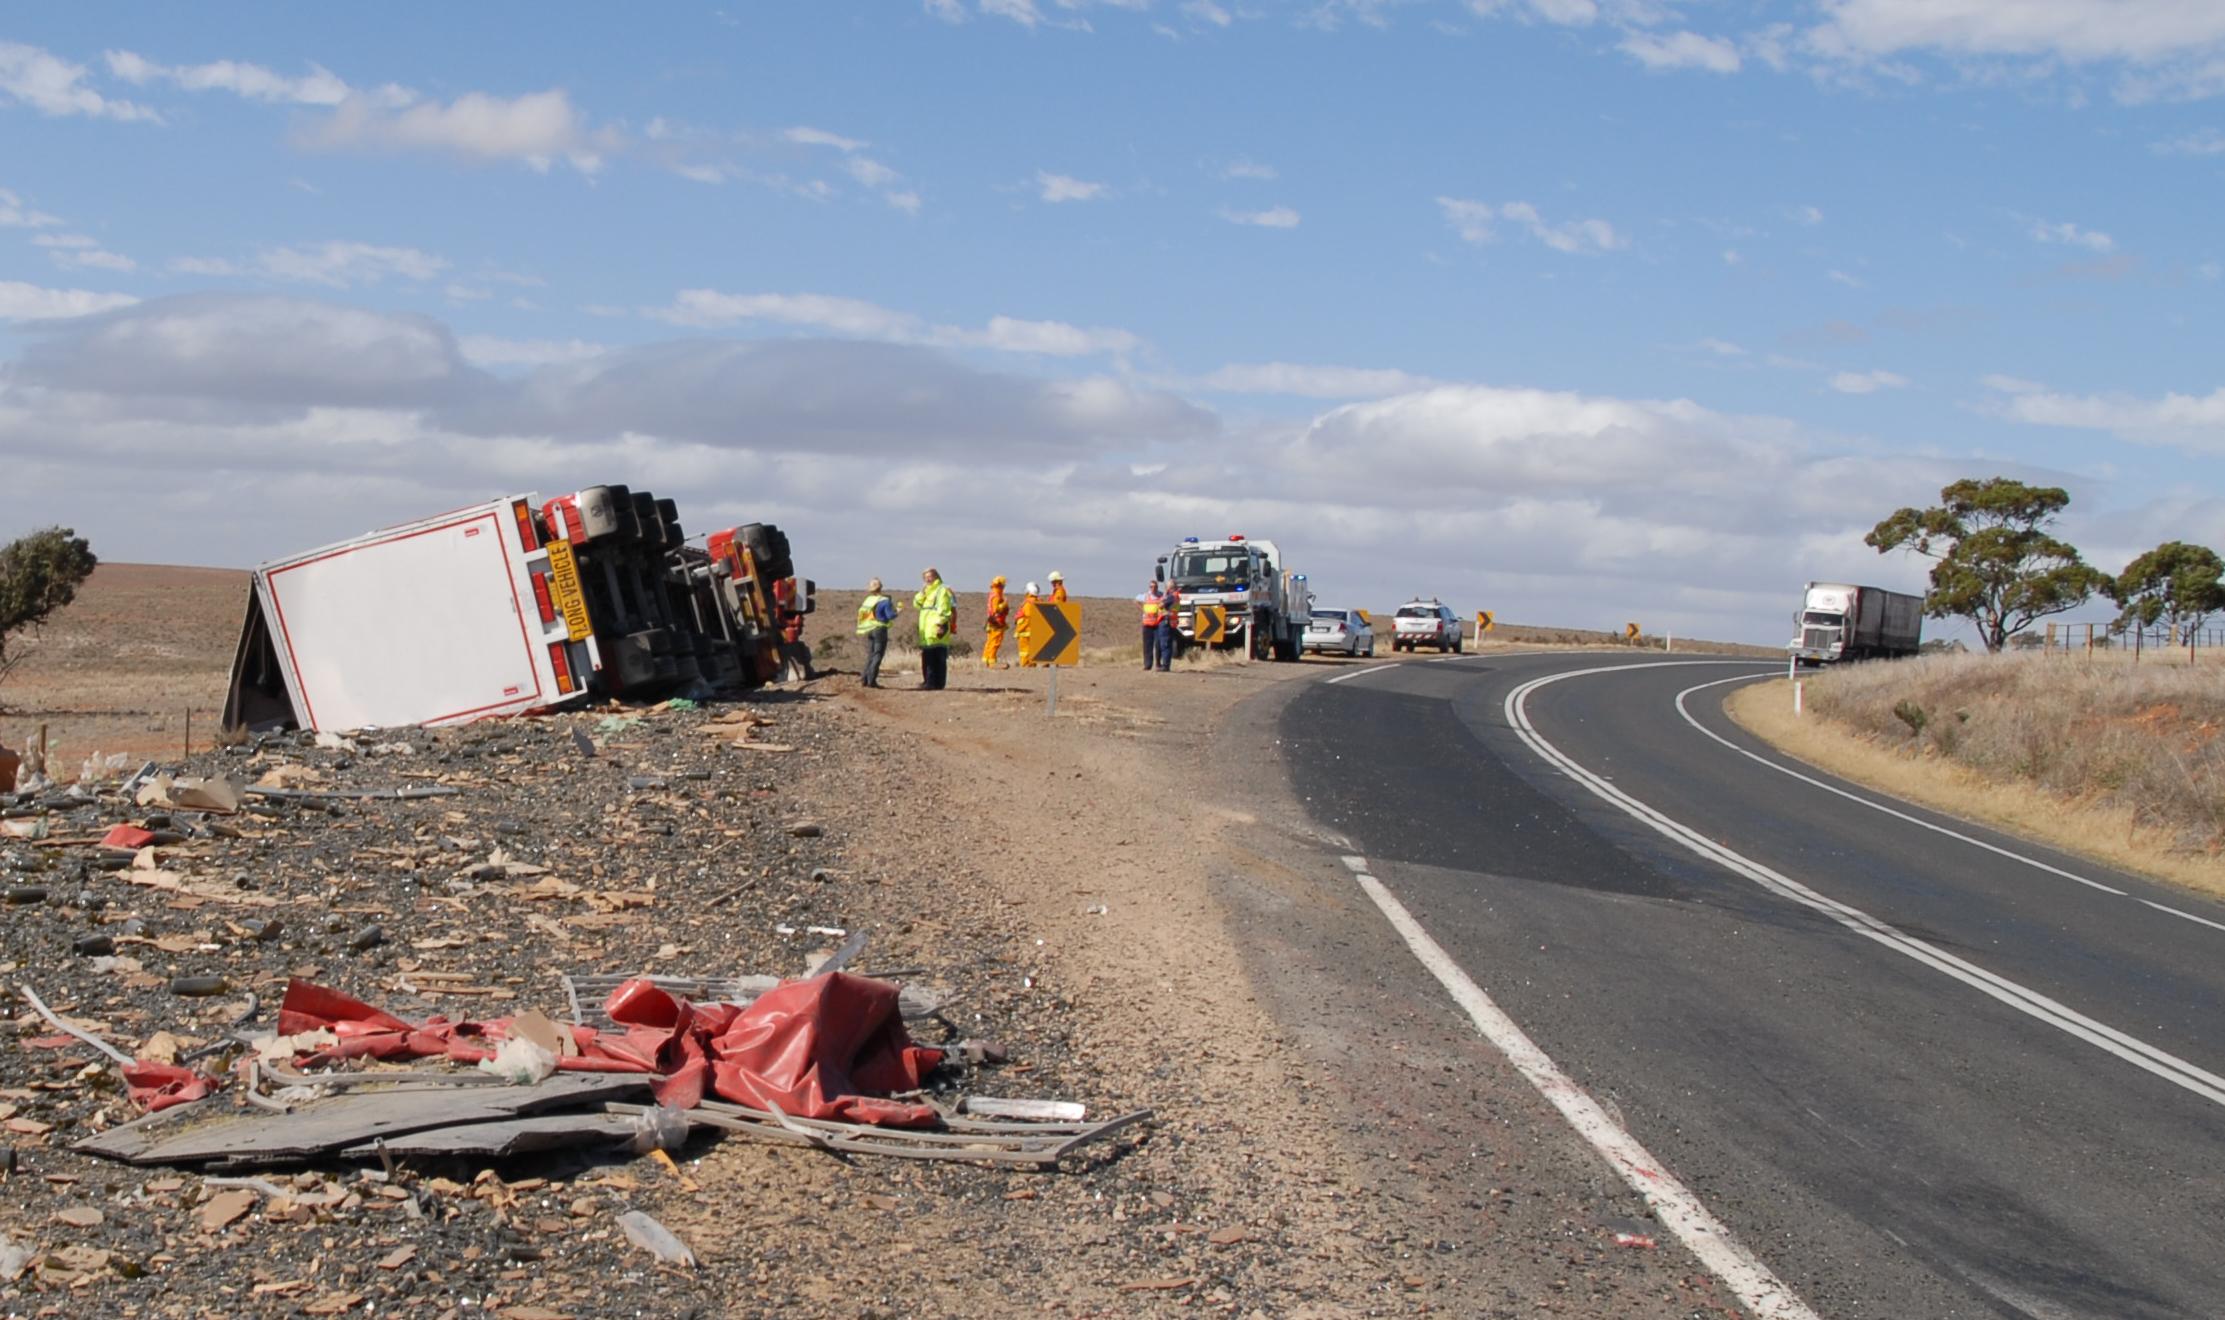 Truck rollover event on rural road in South Australia